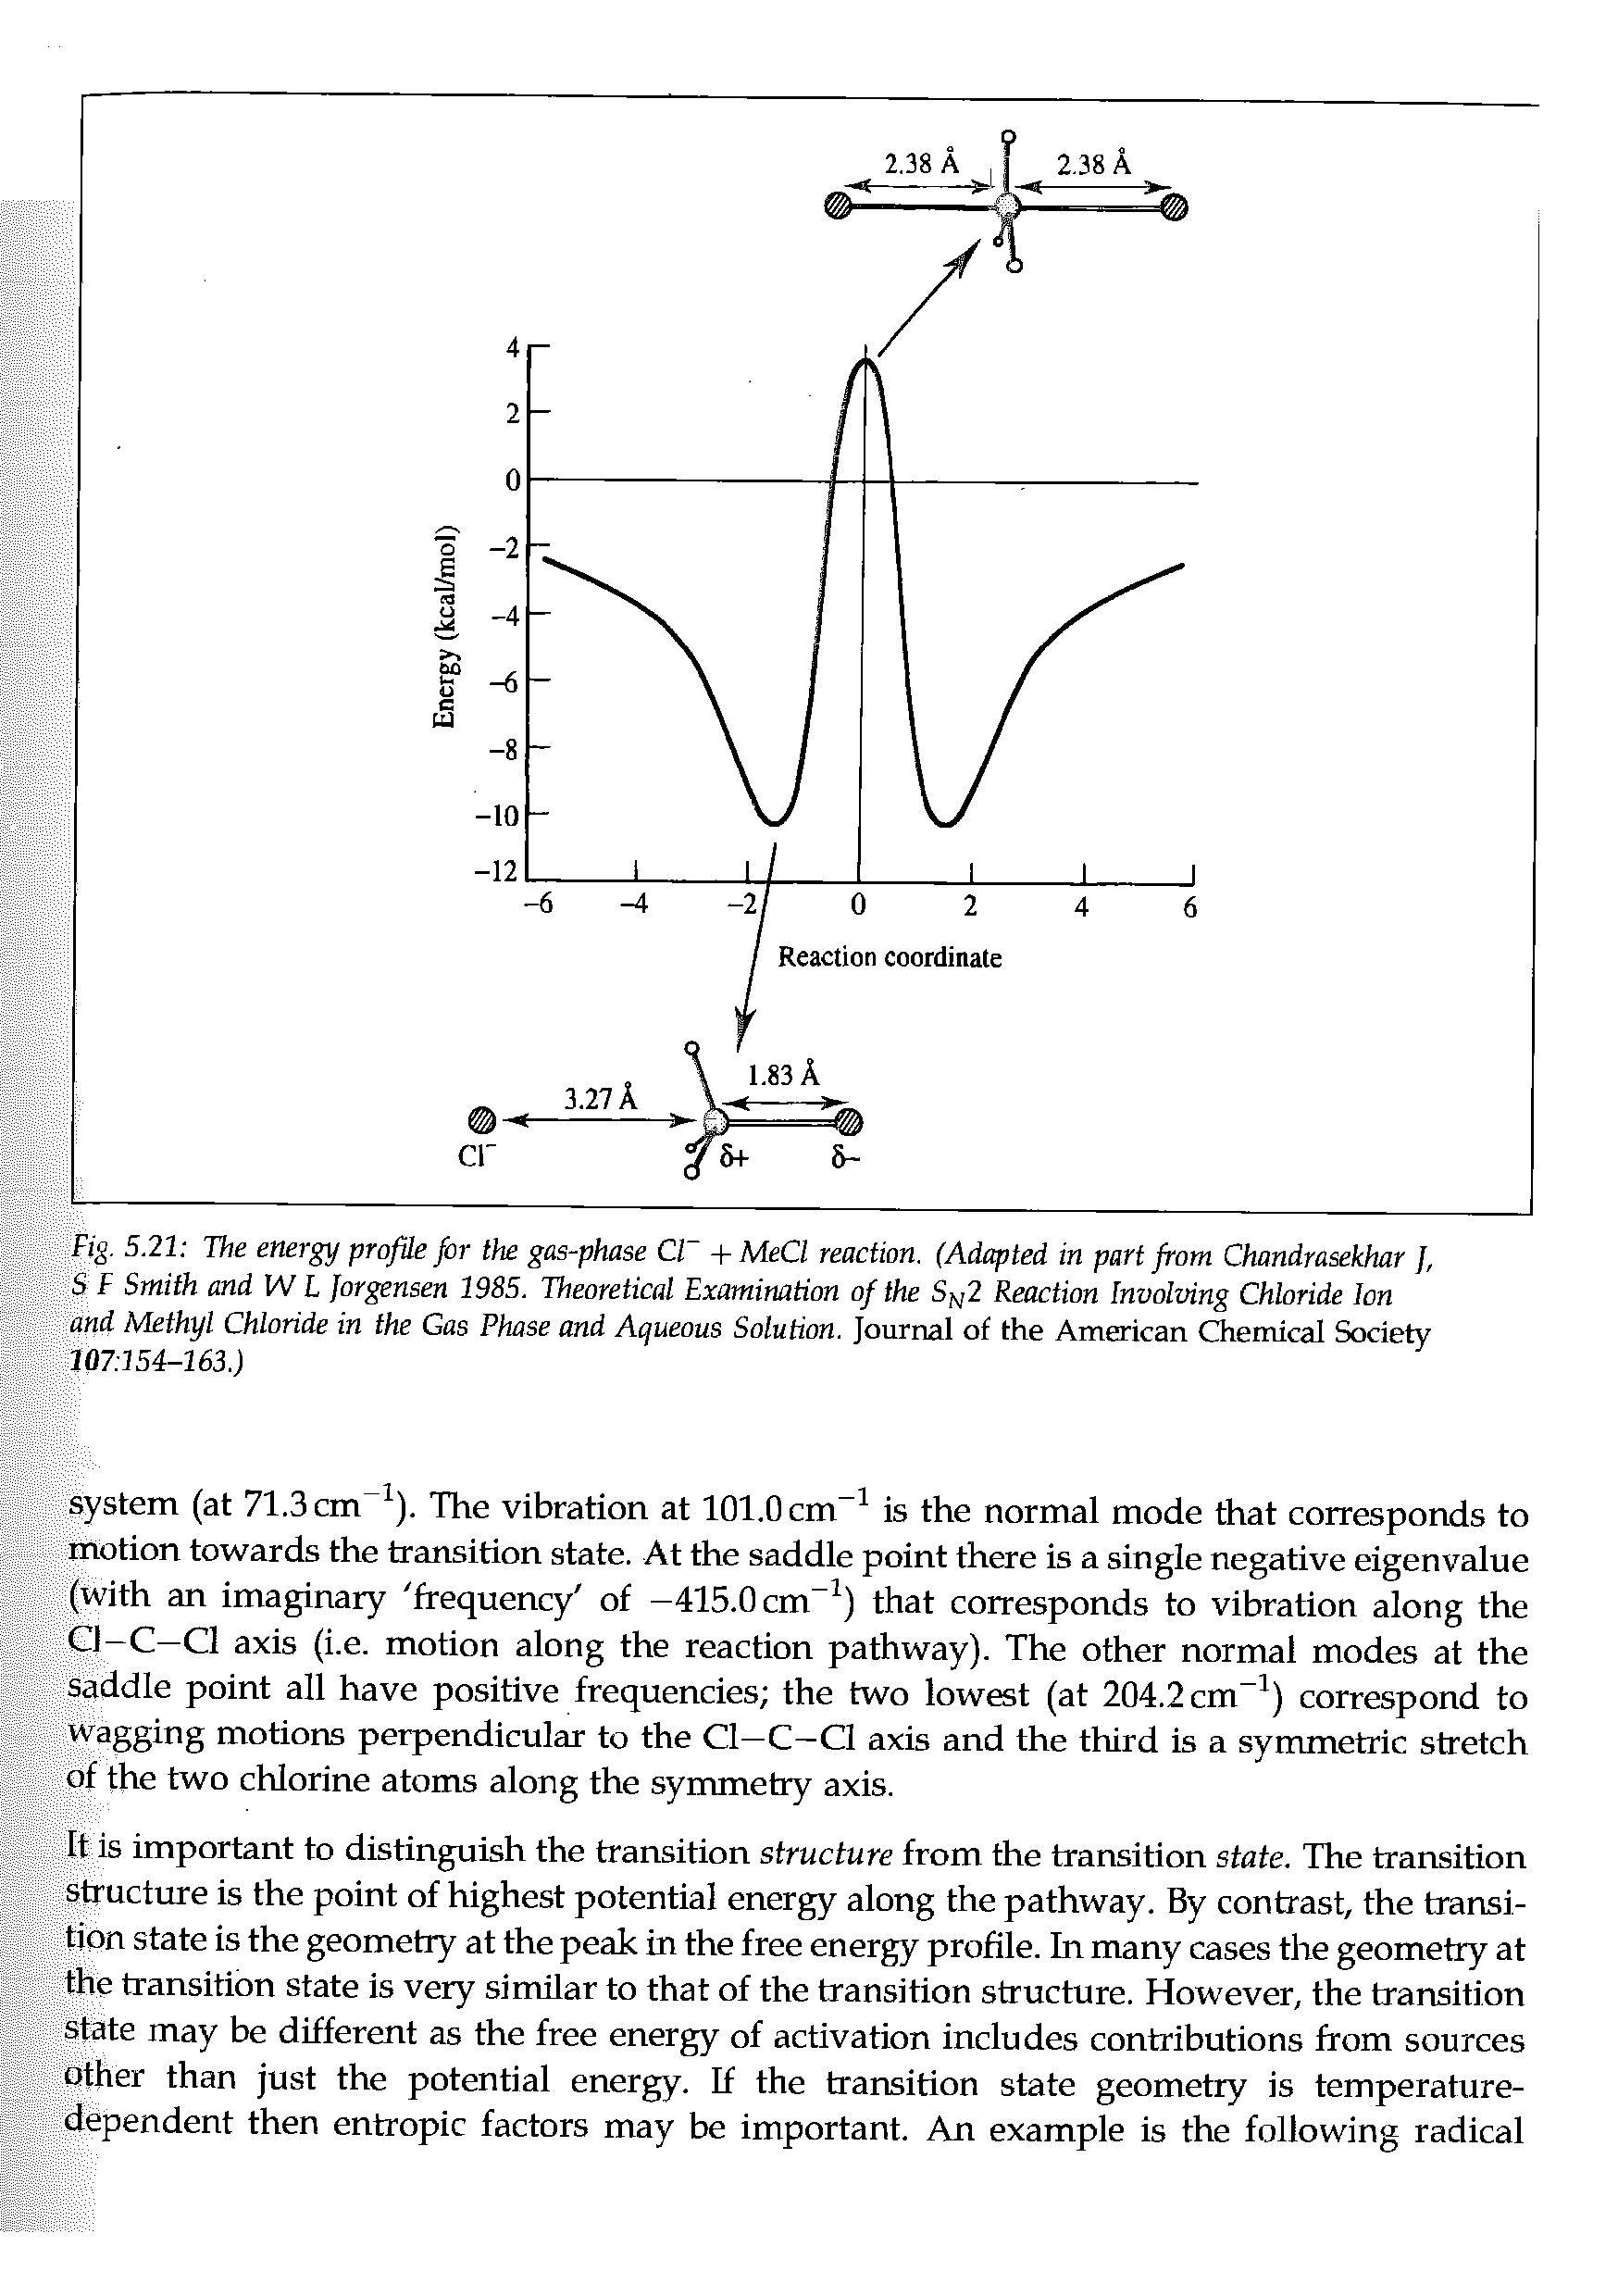 Fig. 5.21 The energy profile for the gas-phase Cl + MeCl reaction. (Adapted in part from Chandrasekhar J, S F Smith and PV L Jorgensen 1985. Theoretical Examination of the S 2 Reaction Involving Chloride Ion and Methyl Chloride in the Gas Phase and Aqueous Solution. Journal of the American Chemical Society 107 154-163.)...